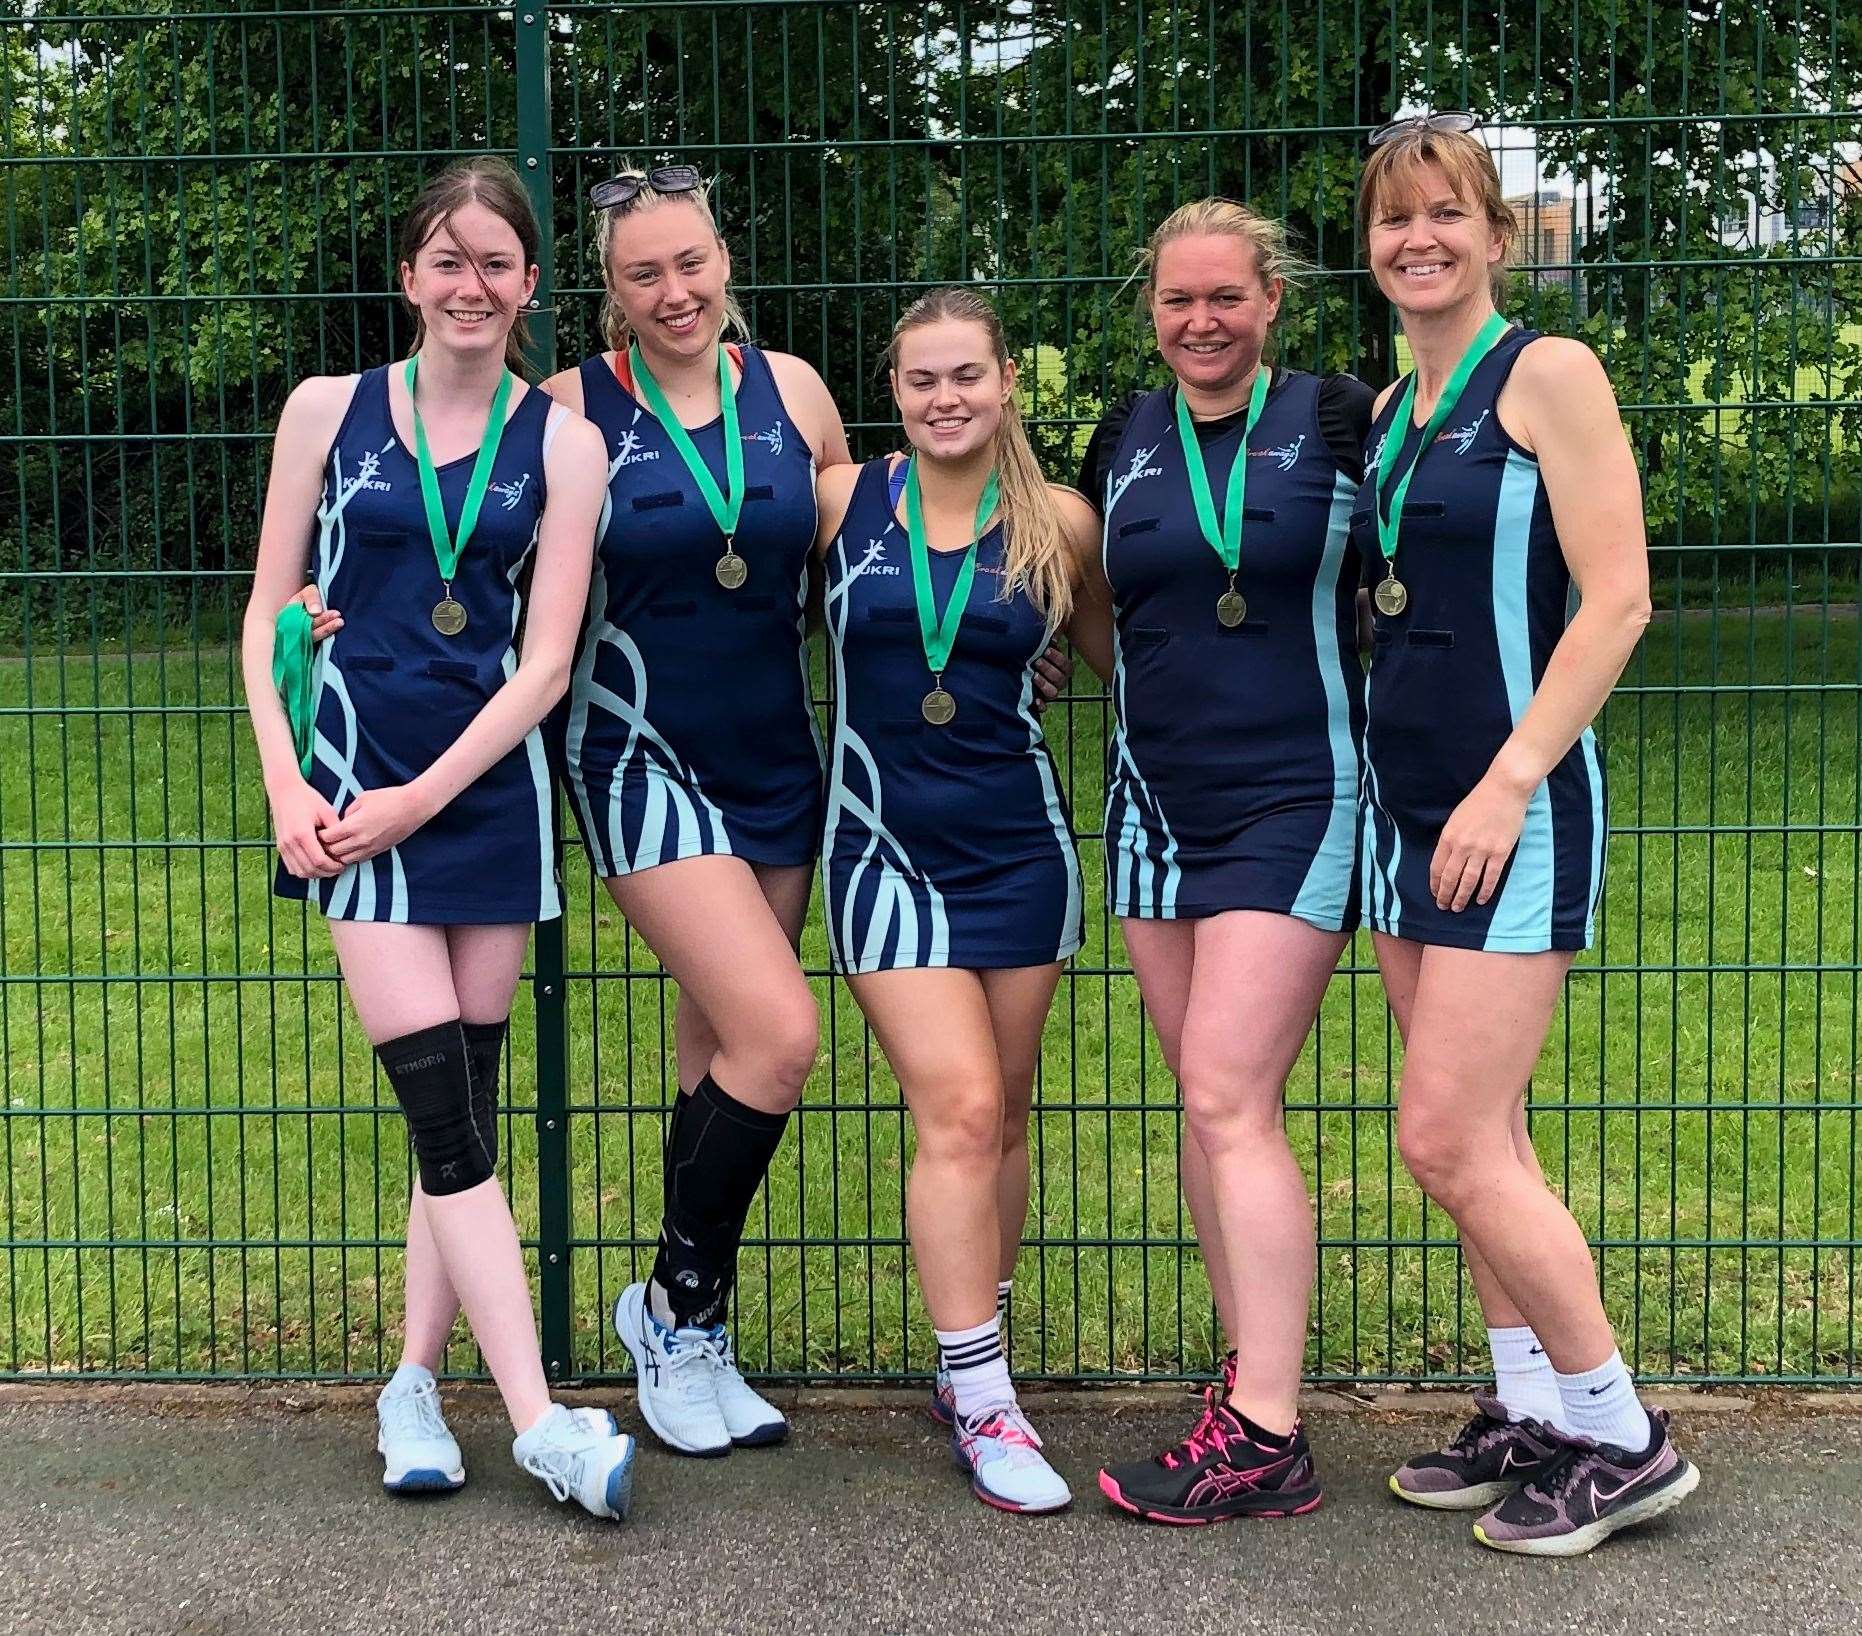 Runners-up in the Ashford Netball League summer tournament - Breakaways Gold. Picture: Sian Tempest